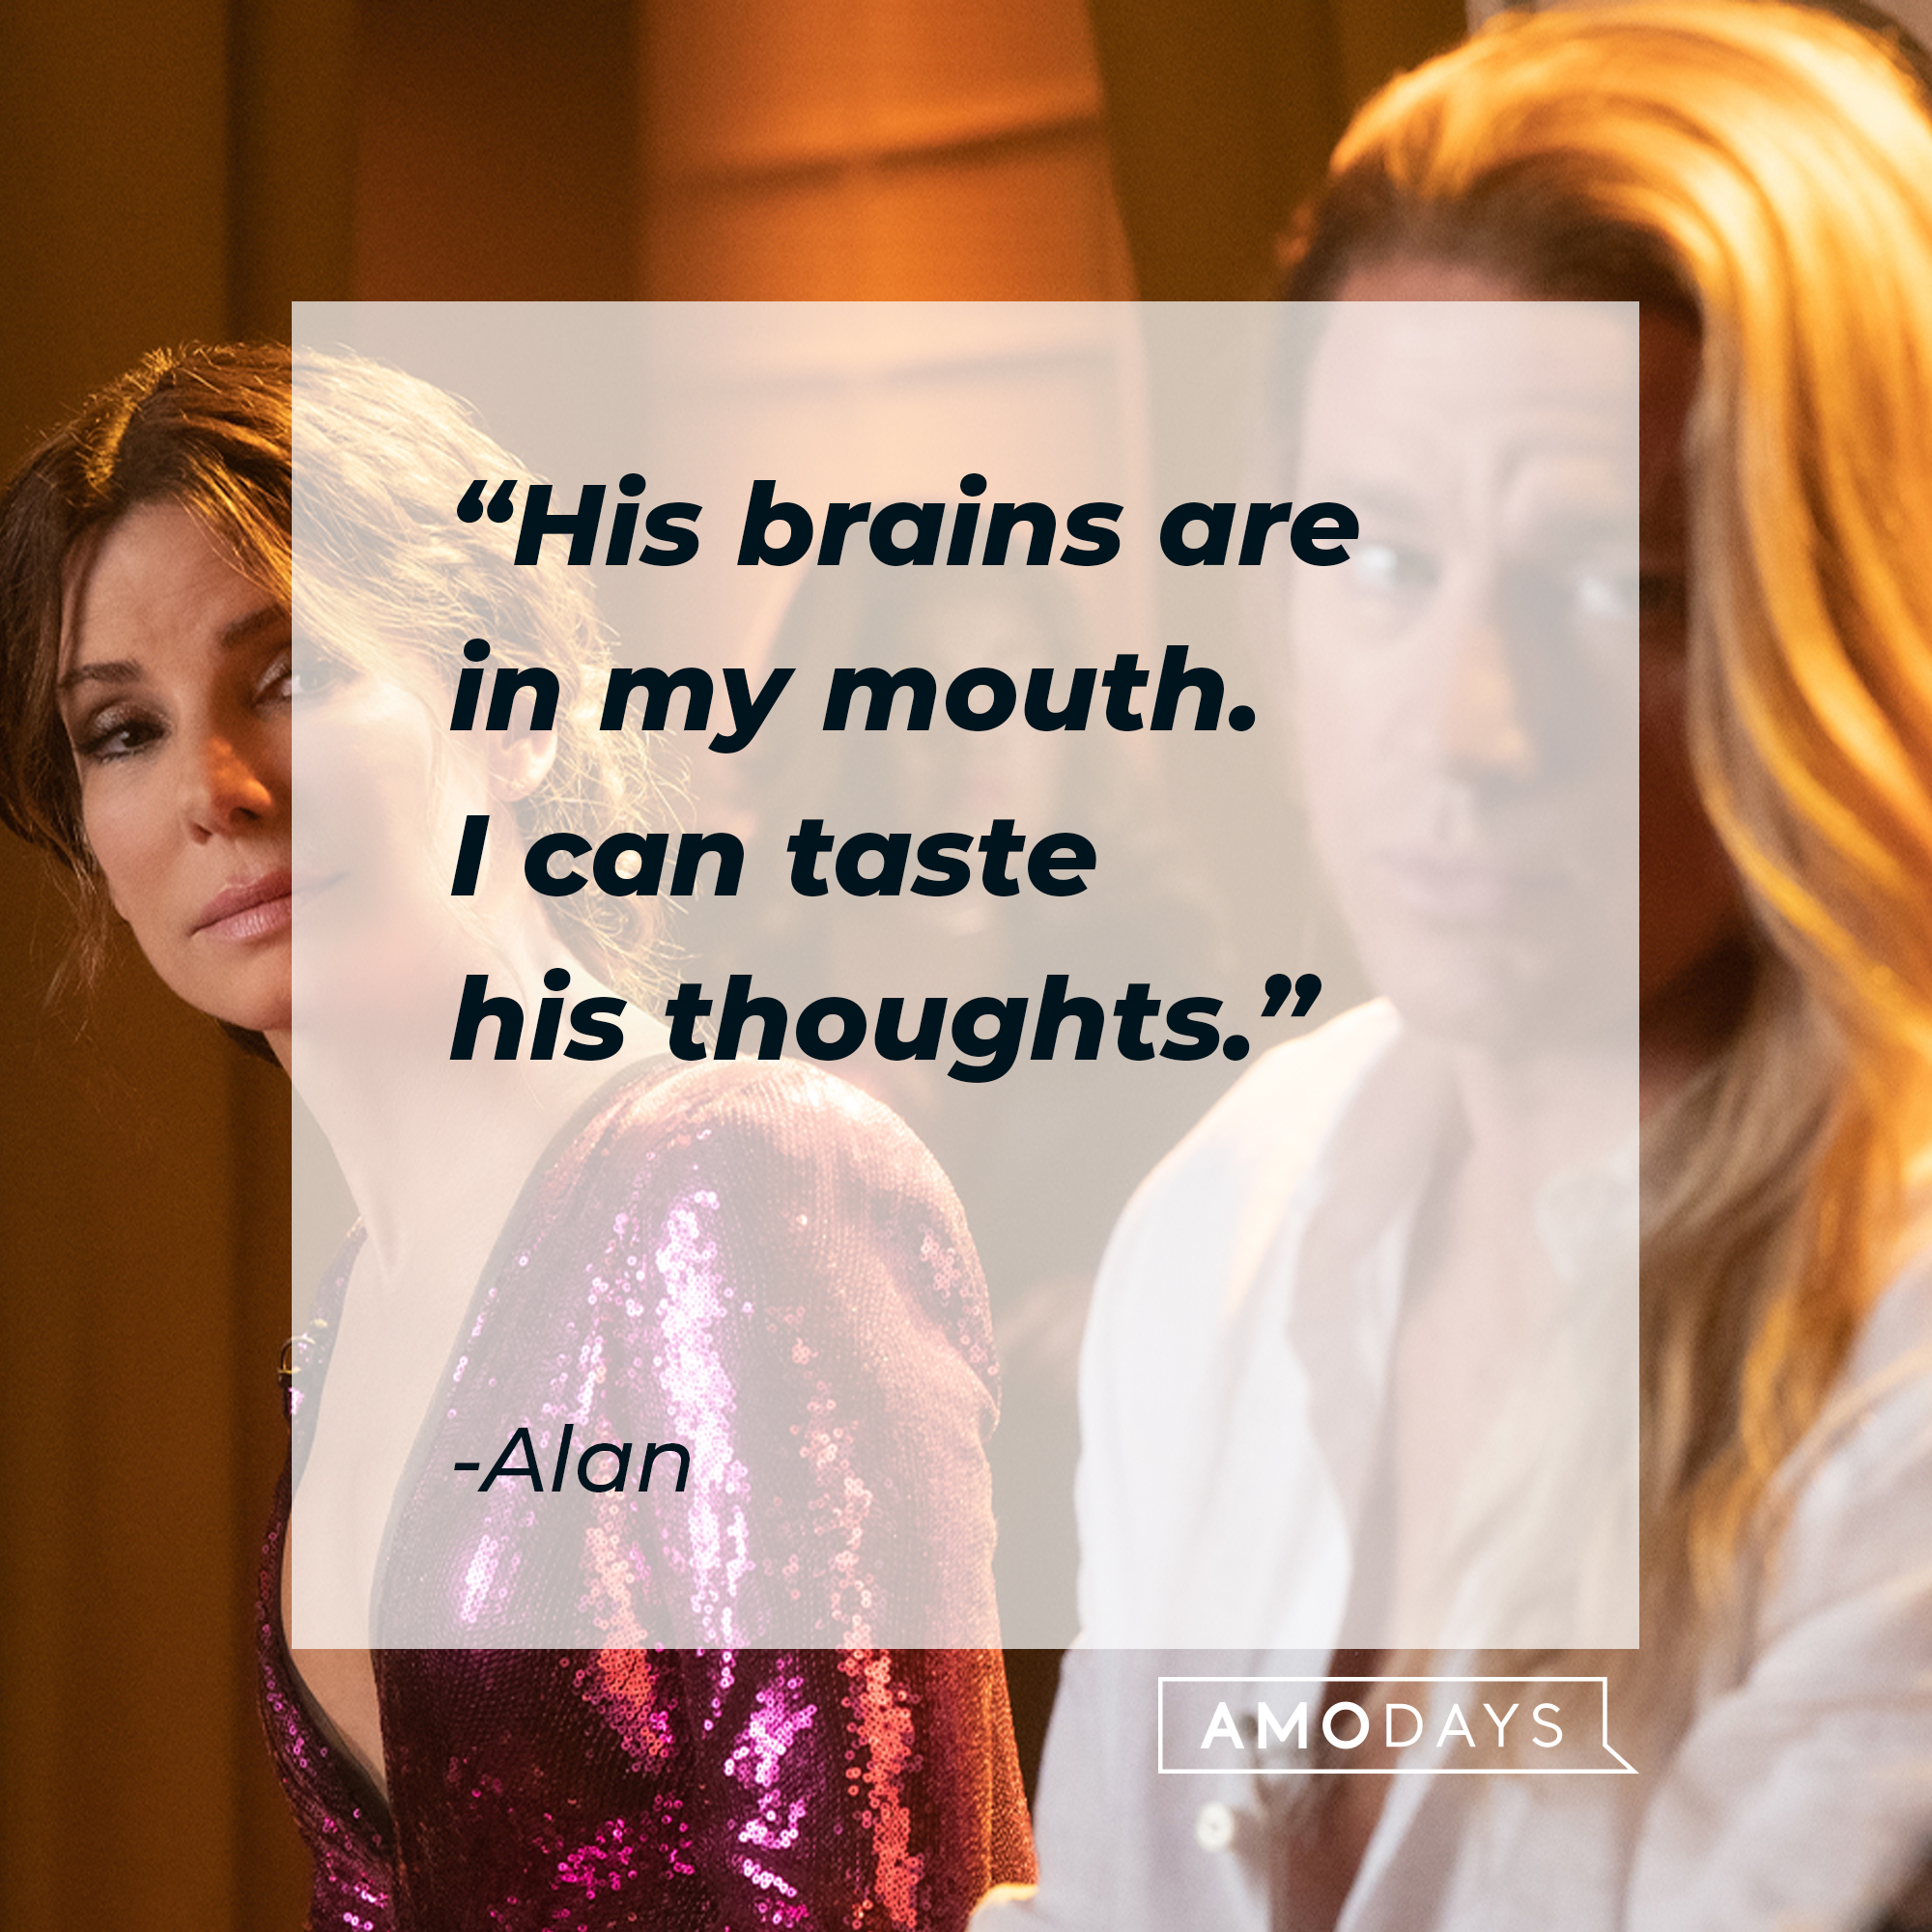 Alan with his quote: "His brains are in my mouth. I can taste his thoughts." | Source: facebook.com/TheLostCityMovie